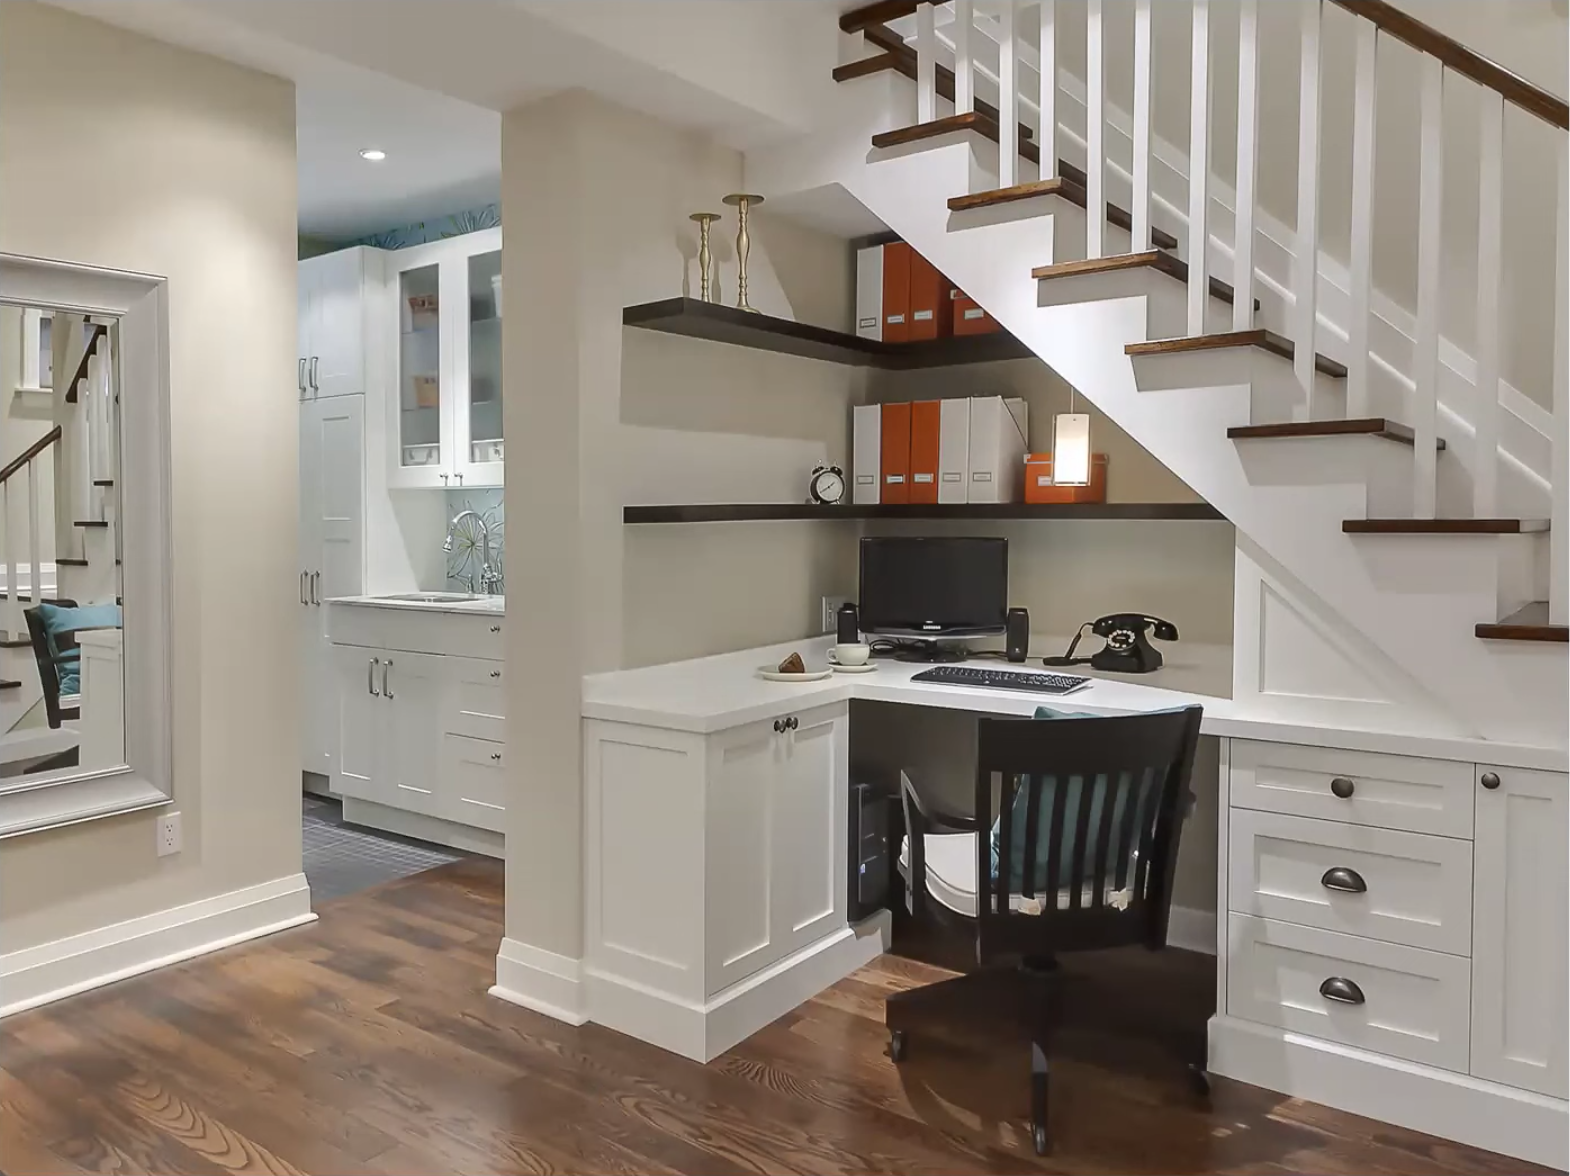 Home office desk built underneath main staircase